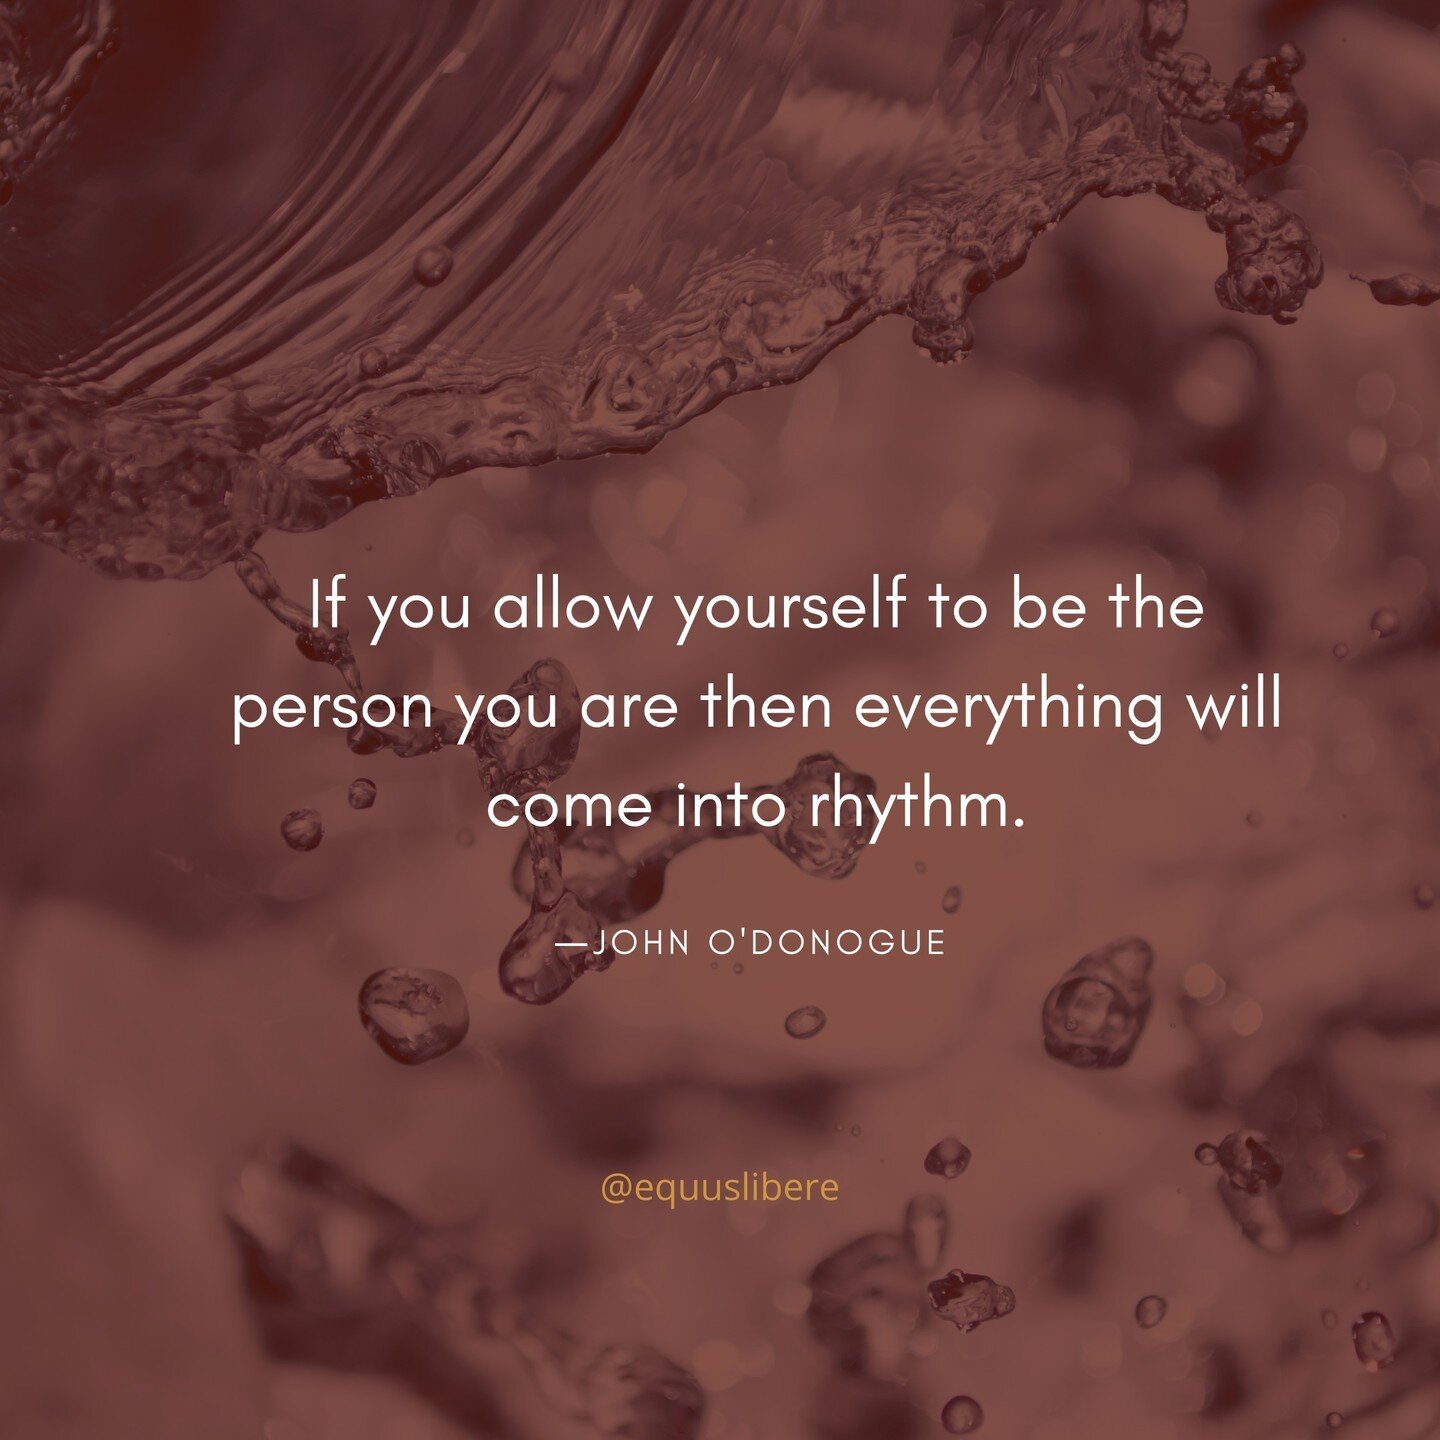 If you allow yourself to be the person you are then everything will come into rhythm.
-John O'Donohue
.
.
.
#quotesoftheday #selfmotivation #inspirationalquotes #quotesdaily #inspired #somatics #wanderer #healing #healingtrauma #wellness #equineleade